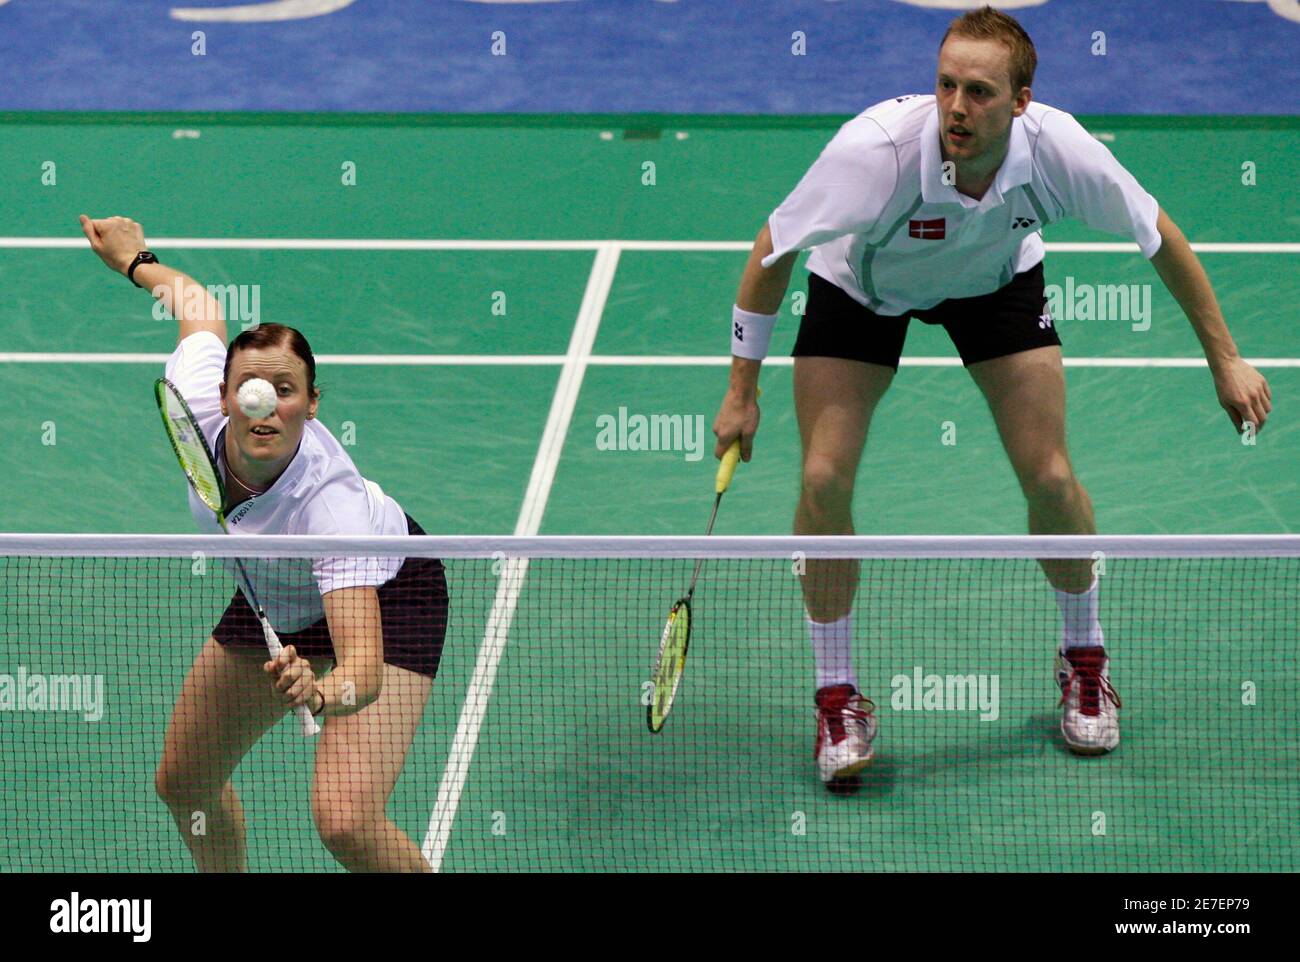 Kamilla Rytter Juhl of Denmark (L) reaches for a shot in front of her  teammate Thomas Laybourn during their mixed doubles quarter-final badminton  match against Flandy Limpele and Vita Marissa of Indonesia